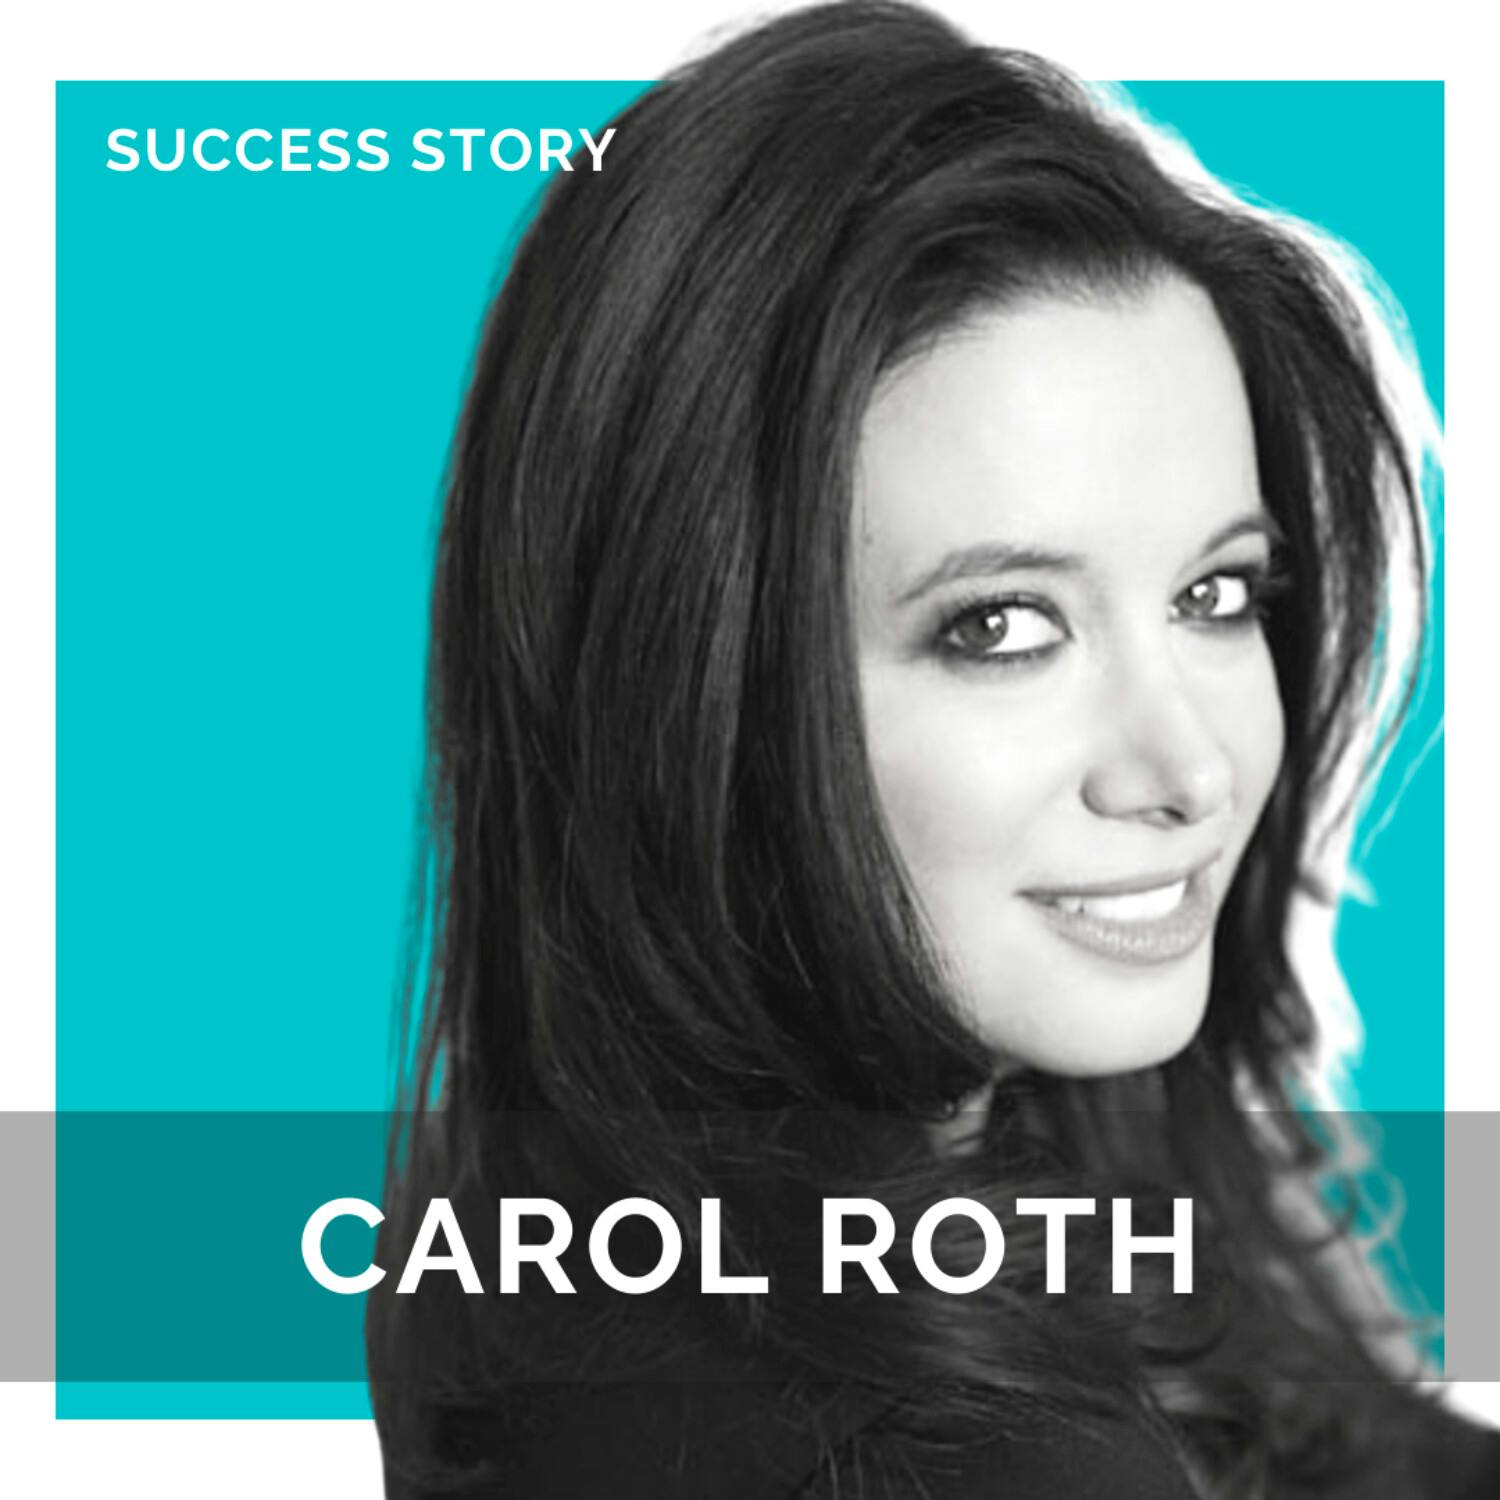 Carol Roth, 2x Best Selling Author, Business Advocate & Board Member | The War On Small Business